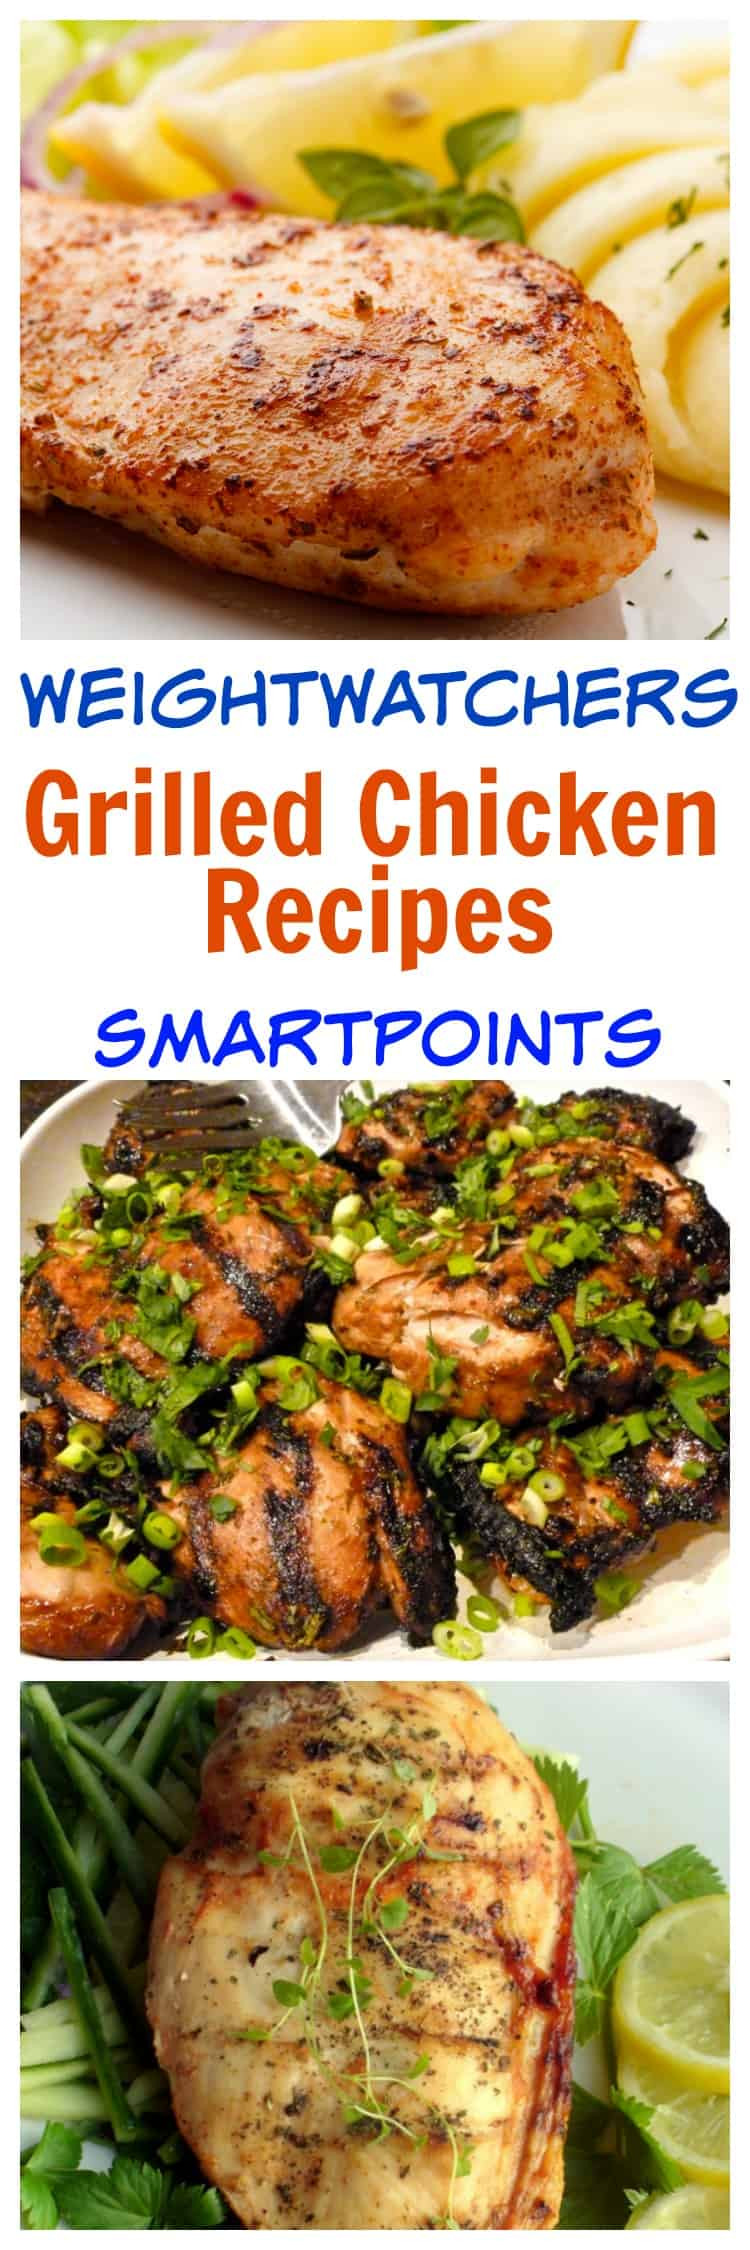 Low Calorie Grilled Chicken Recipes
 27 Low Calorie Grilled Chicken Recipes